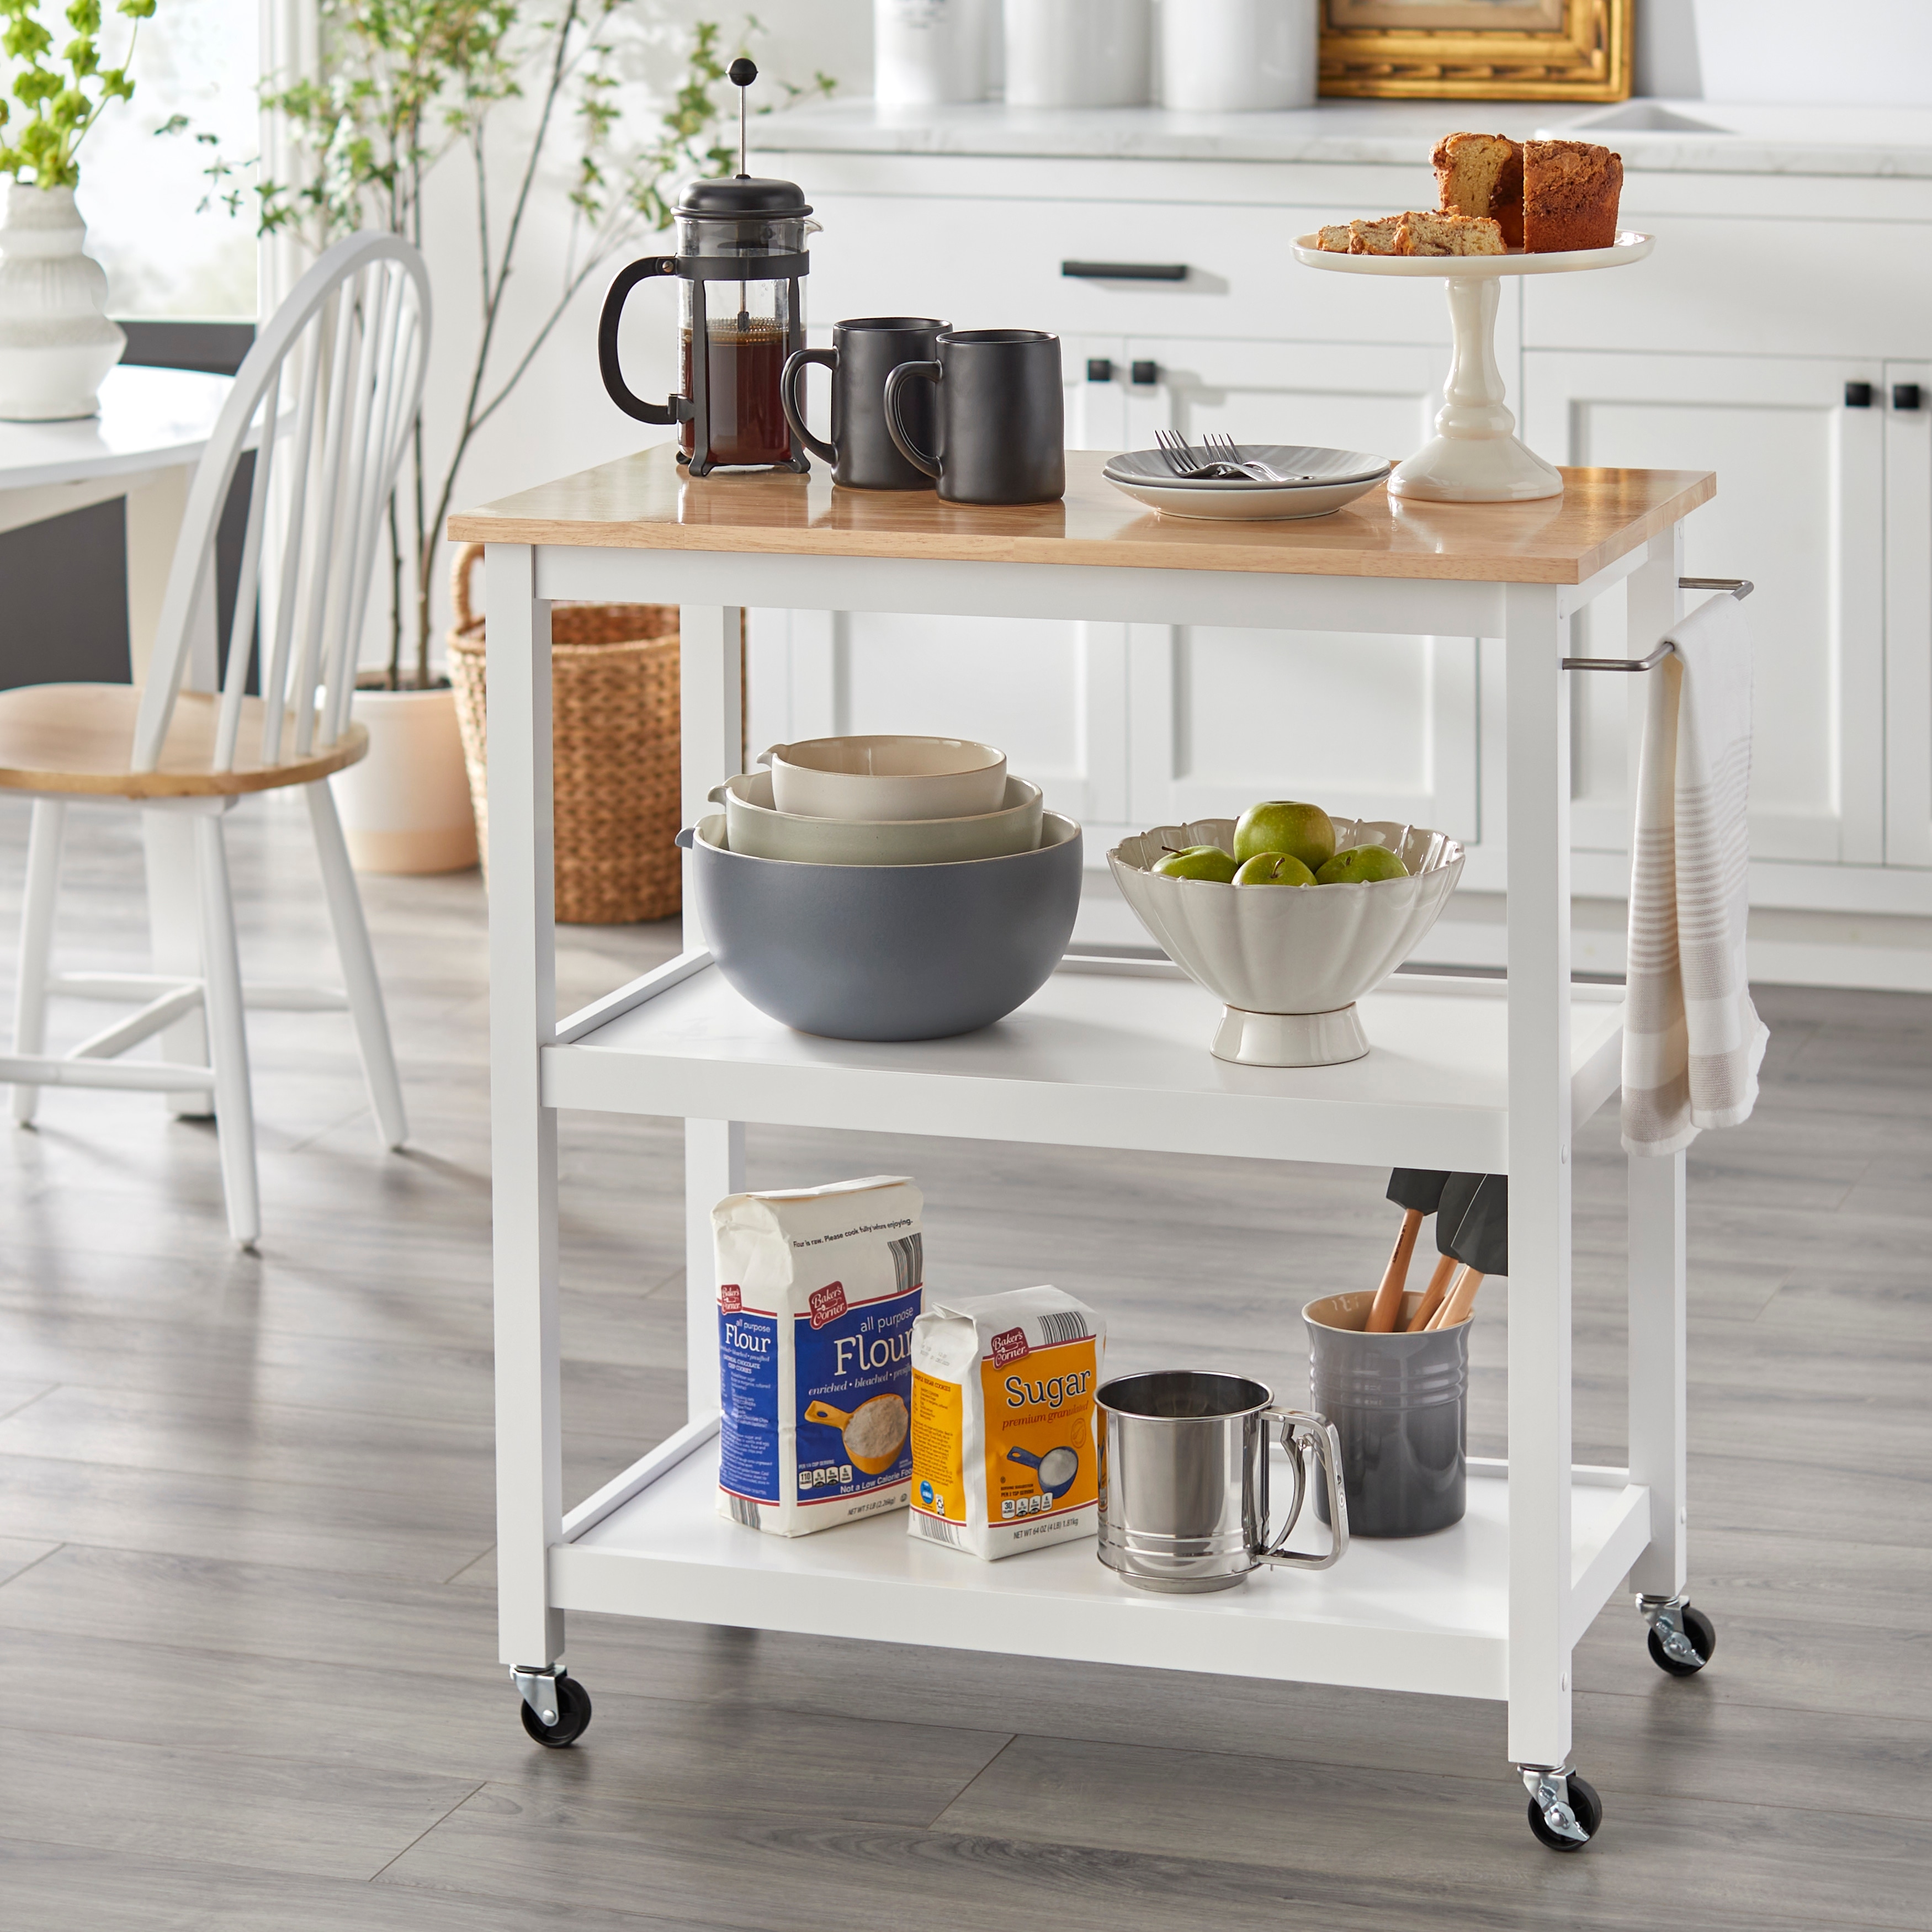 https://ak1.ostkcdn.com/images/products/is/images/direct/08ee691e2c2276c9d822d0842224df02d7bcfd58/Simple-Living-Janelle-Rolling-Kitchen-Cart.jpg